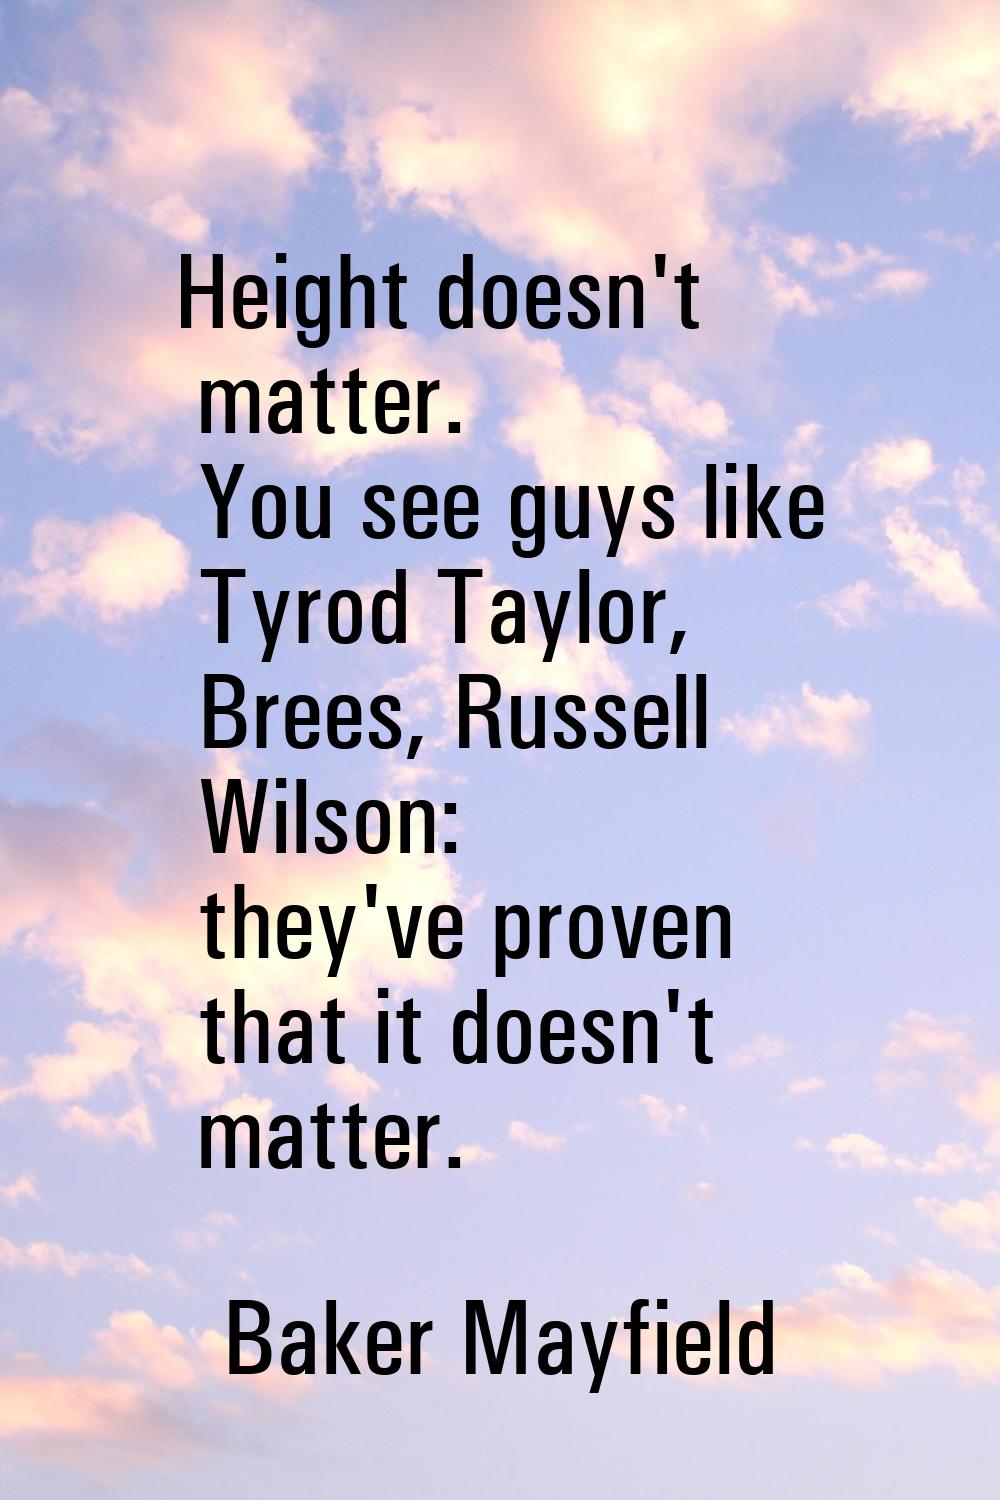 Height doesn't matter. You see guys like Tyrod Taylor, Brees, Russell Wilson: they've proven that i